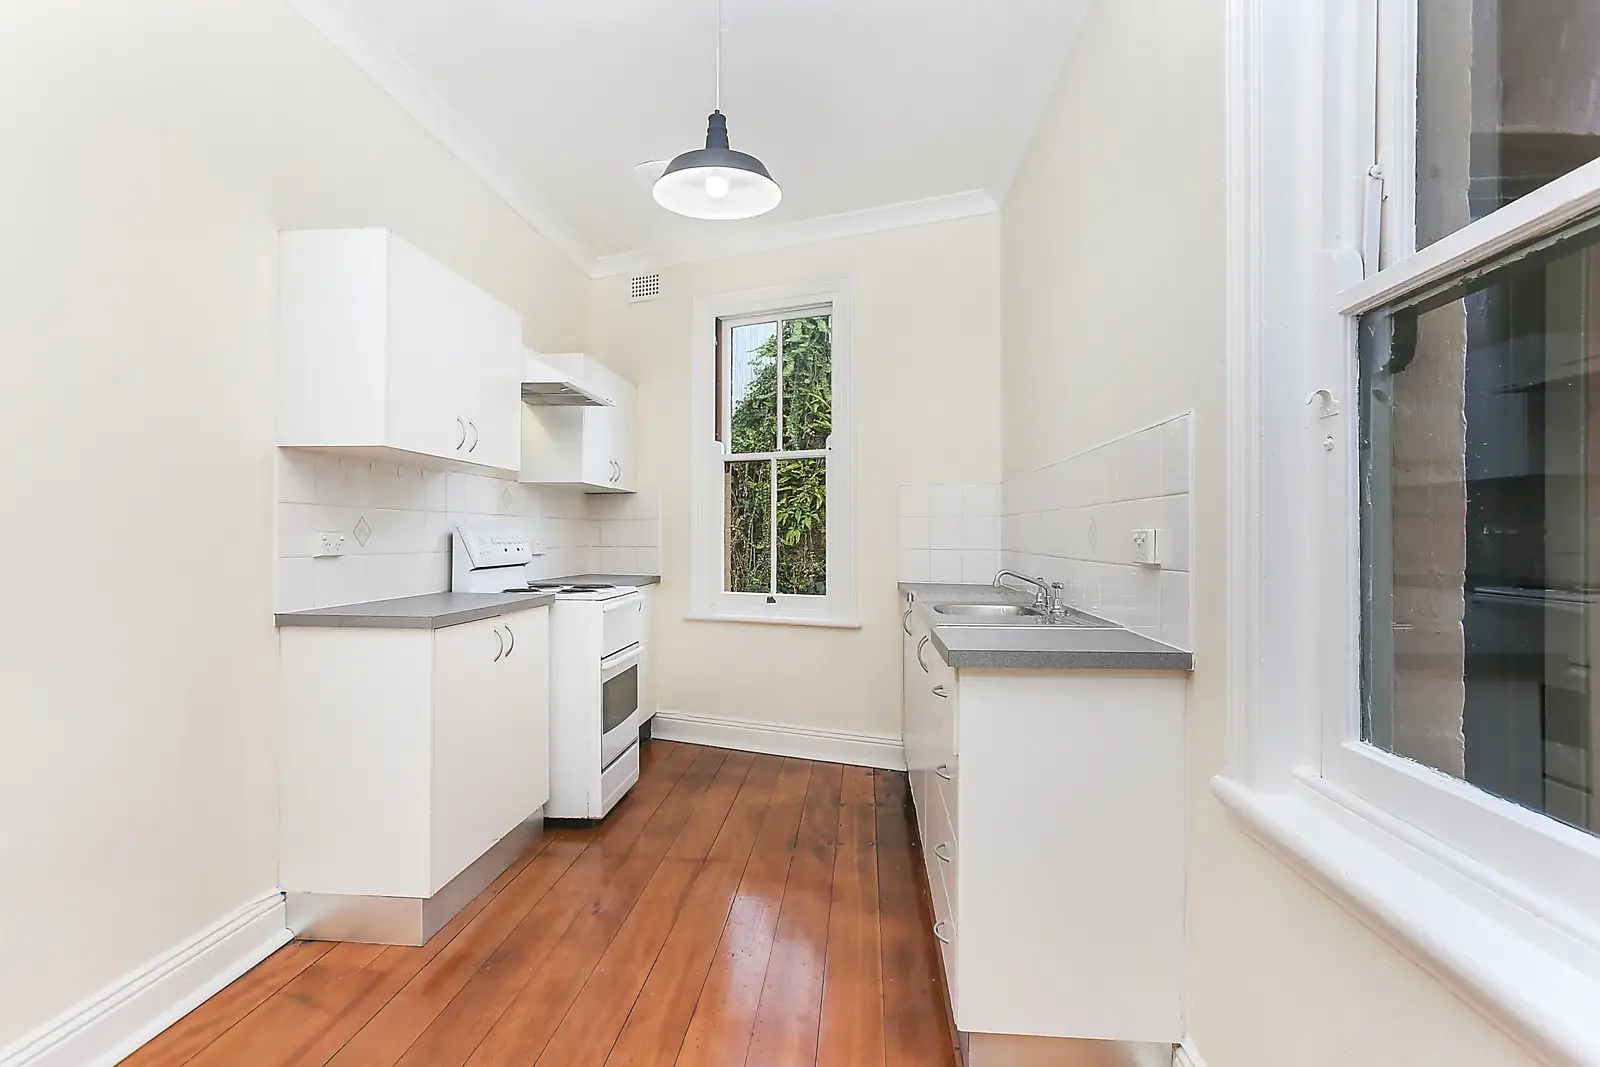 23-25A Dalgety Road, Millers Point Leased by Sydney Sotheby's International Realty - image 3